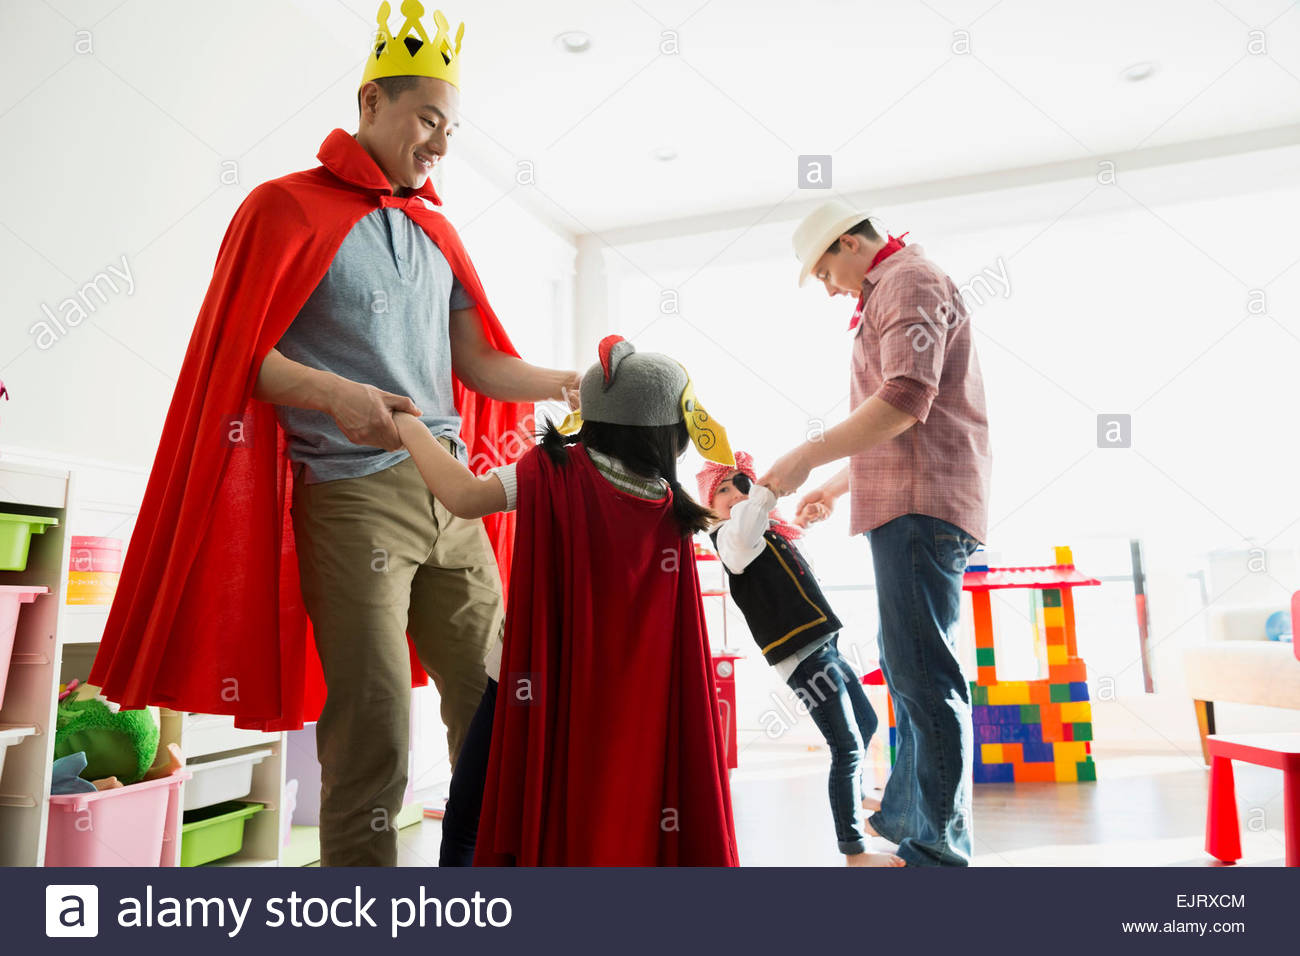 Fathers and daughters in costumes dancing Stock Photo